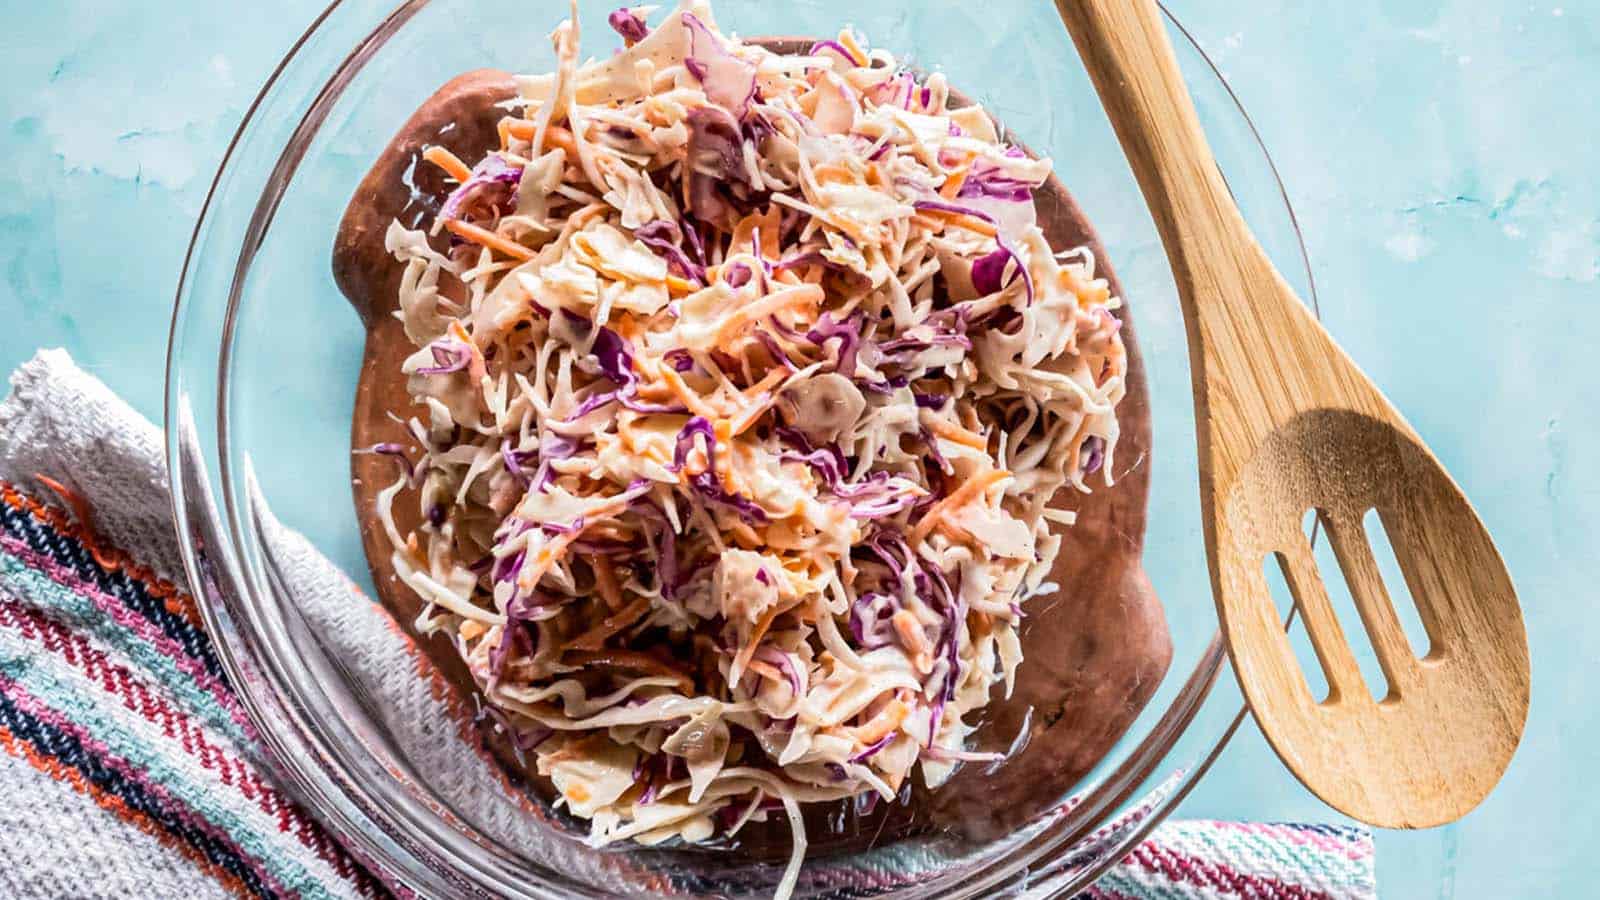 A picture of low-carb coleslaw recipe with creamy dressing in glass bowl.